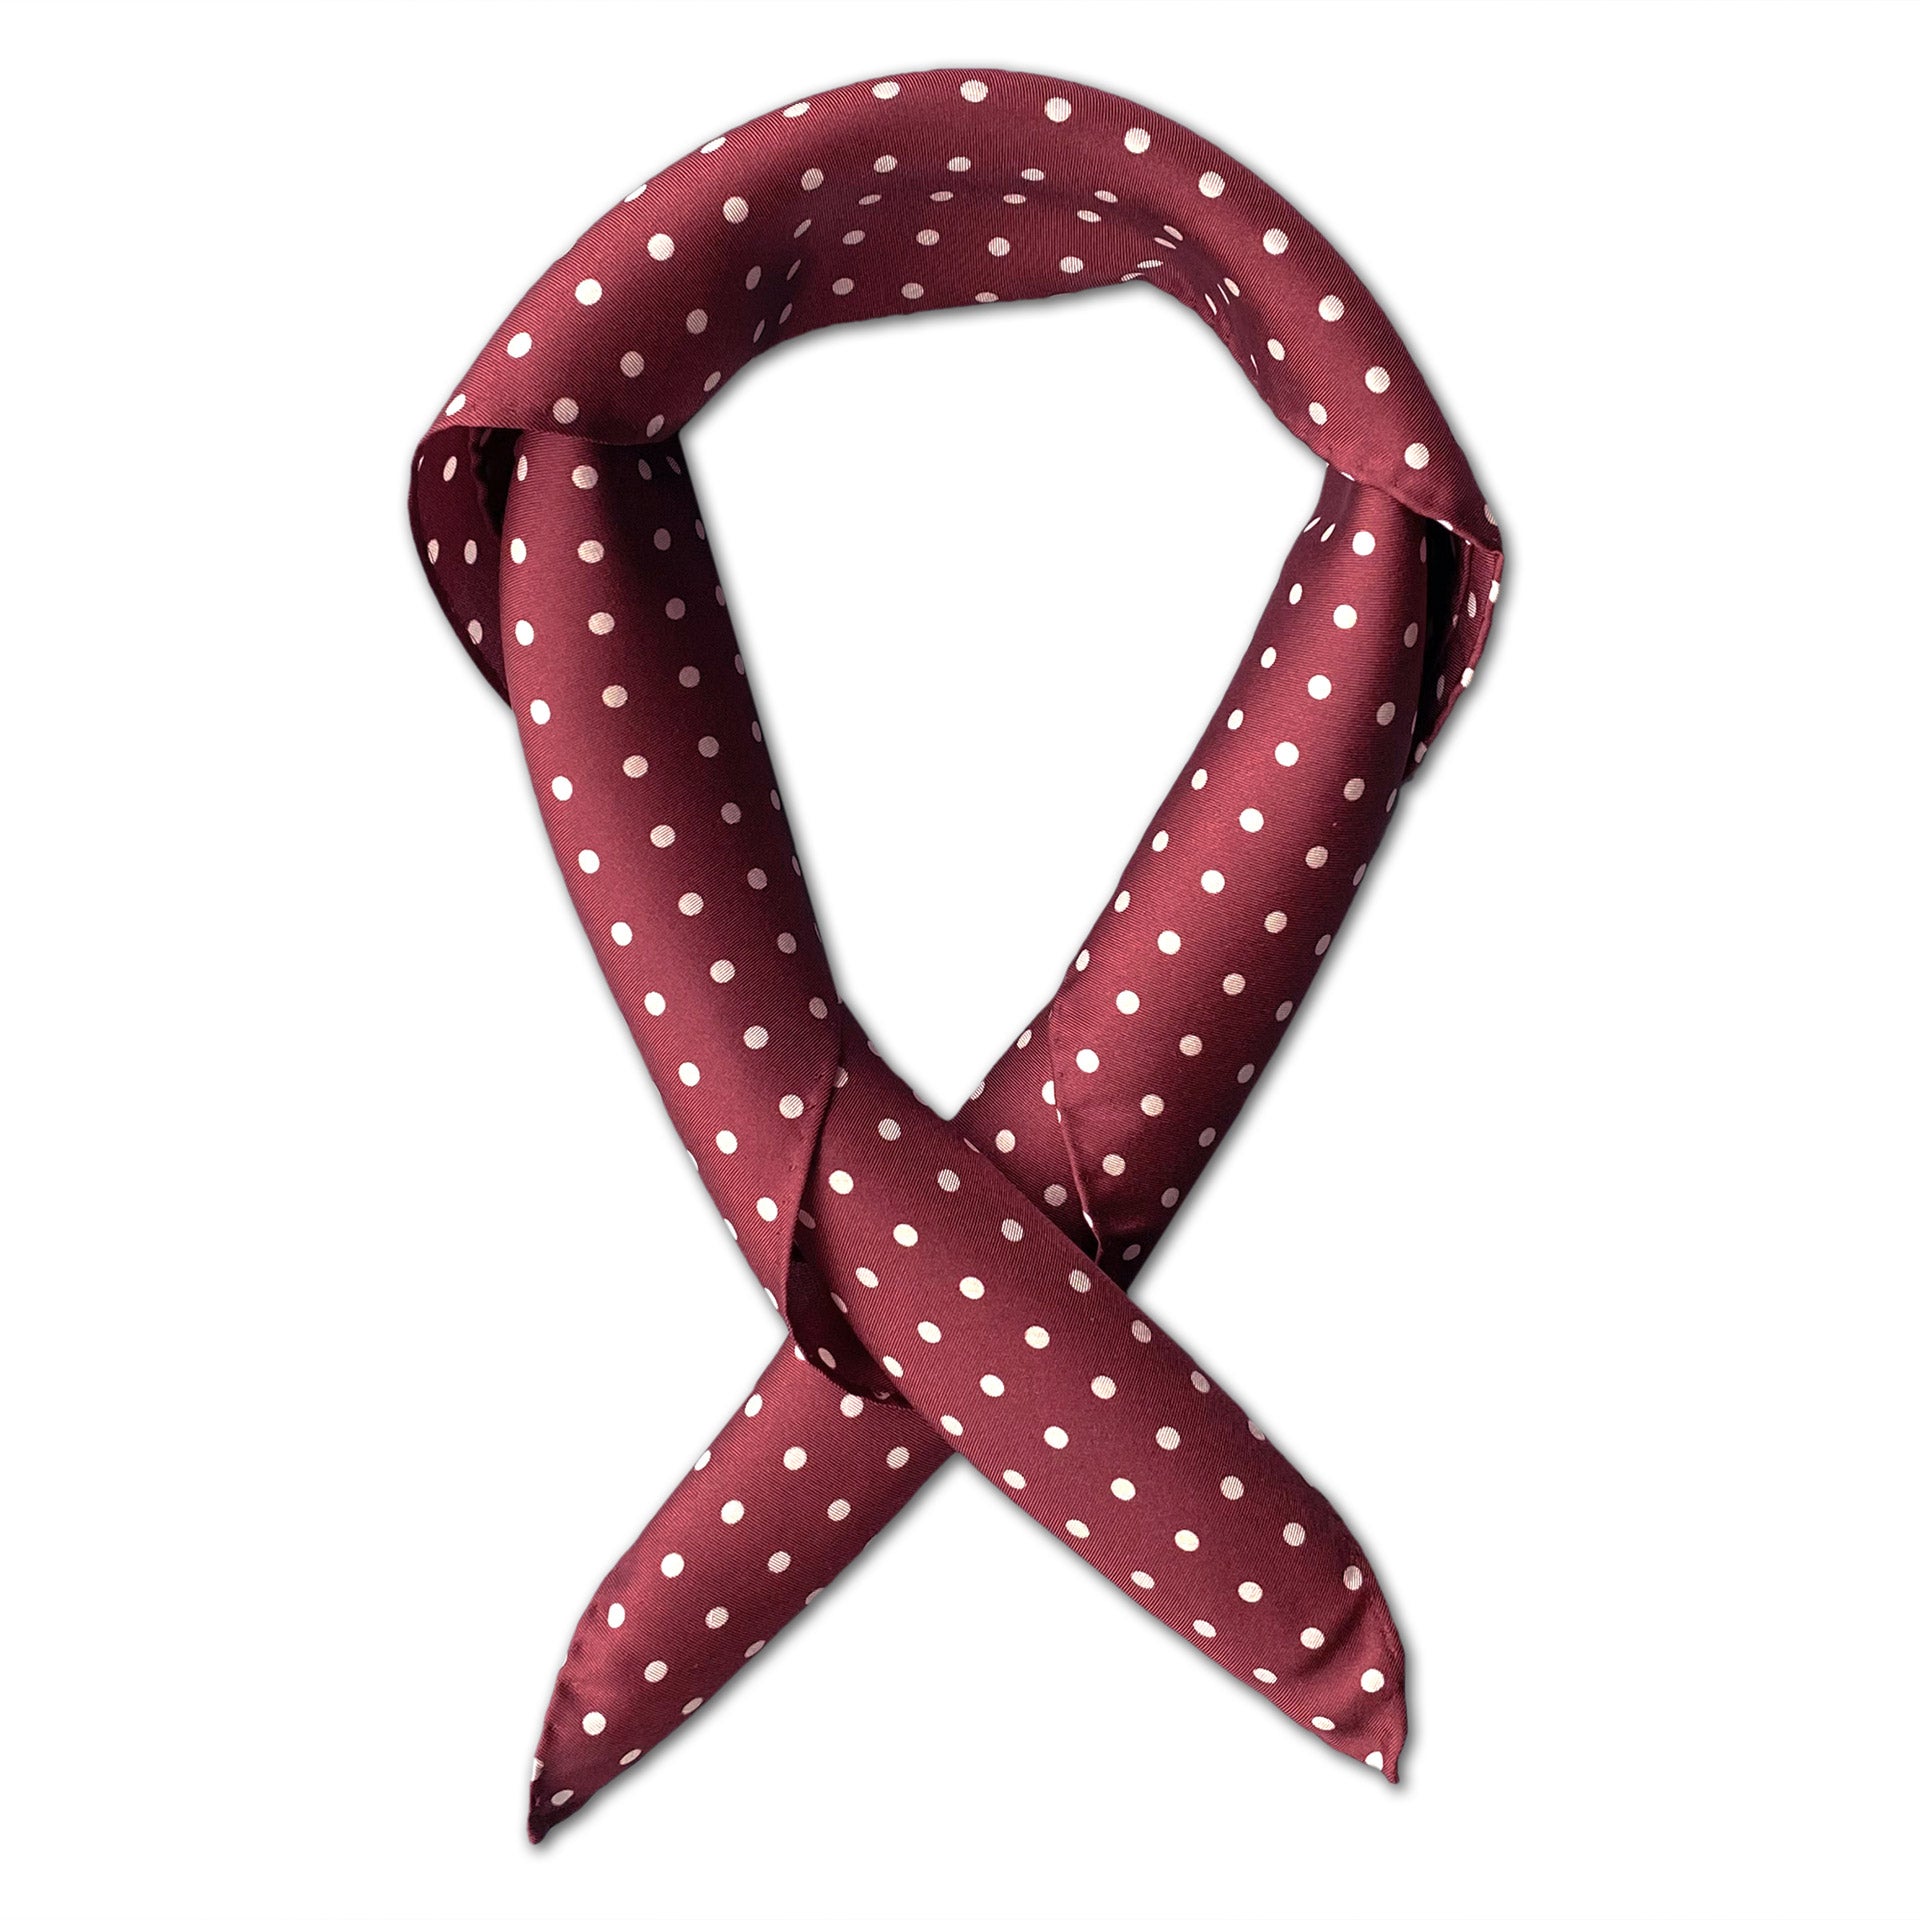 Square scarf rolled into a loop, showing the timeless white polka-dot pattern on a maroon background.